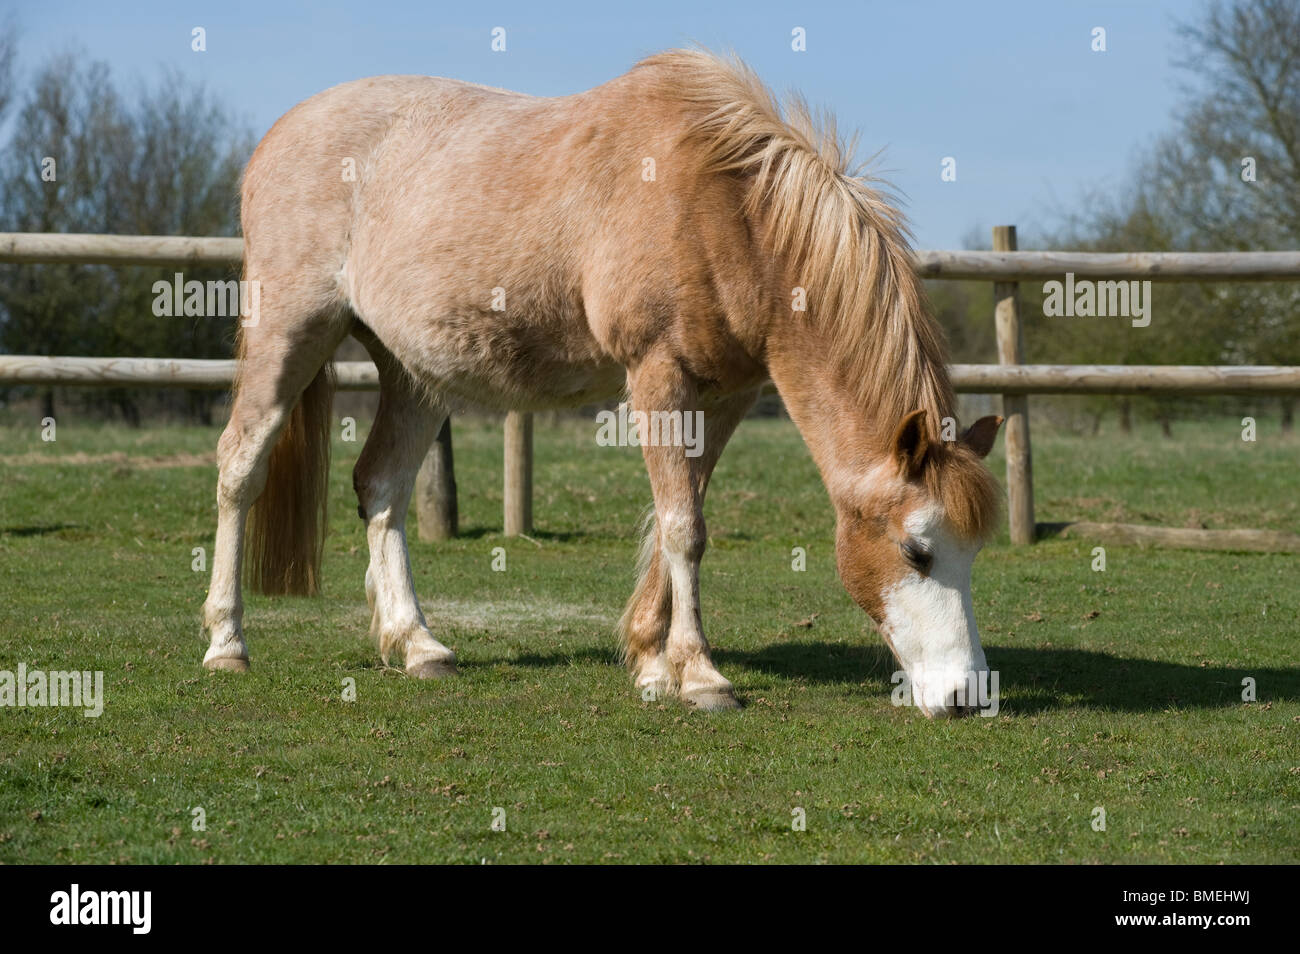 Strawberry roan new forest horse at an animal rescue centre. Stock Photo